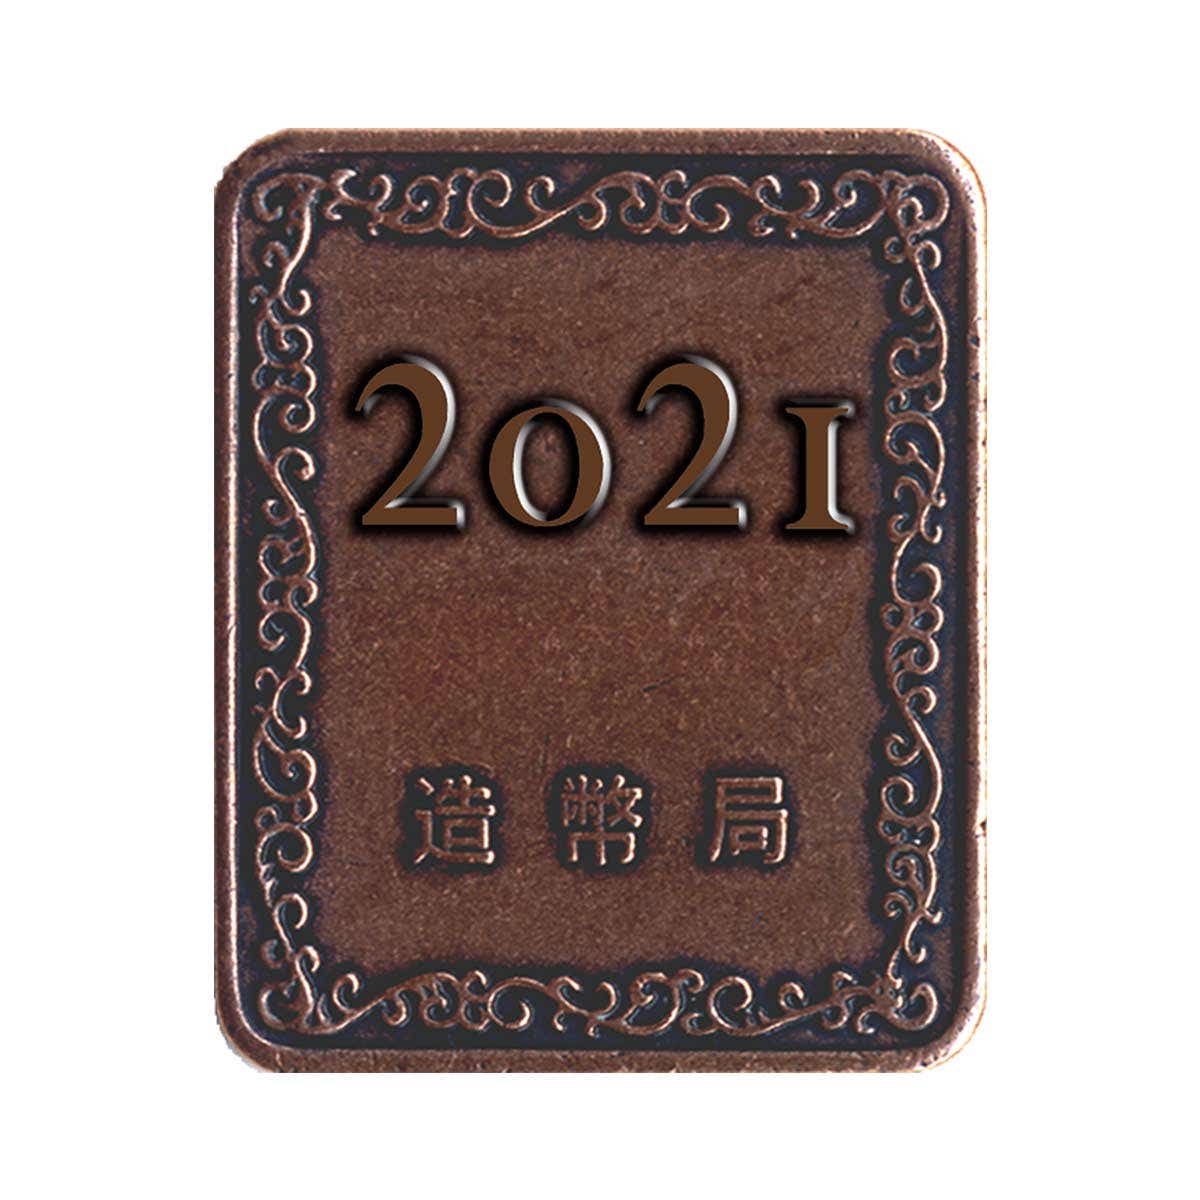 Japan 2021 Six-Coin Proof Set with New 500 Yen